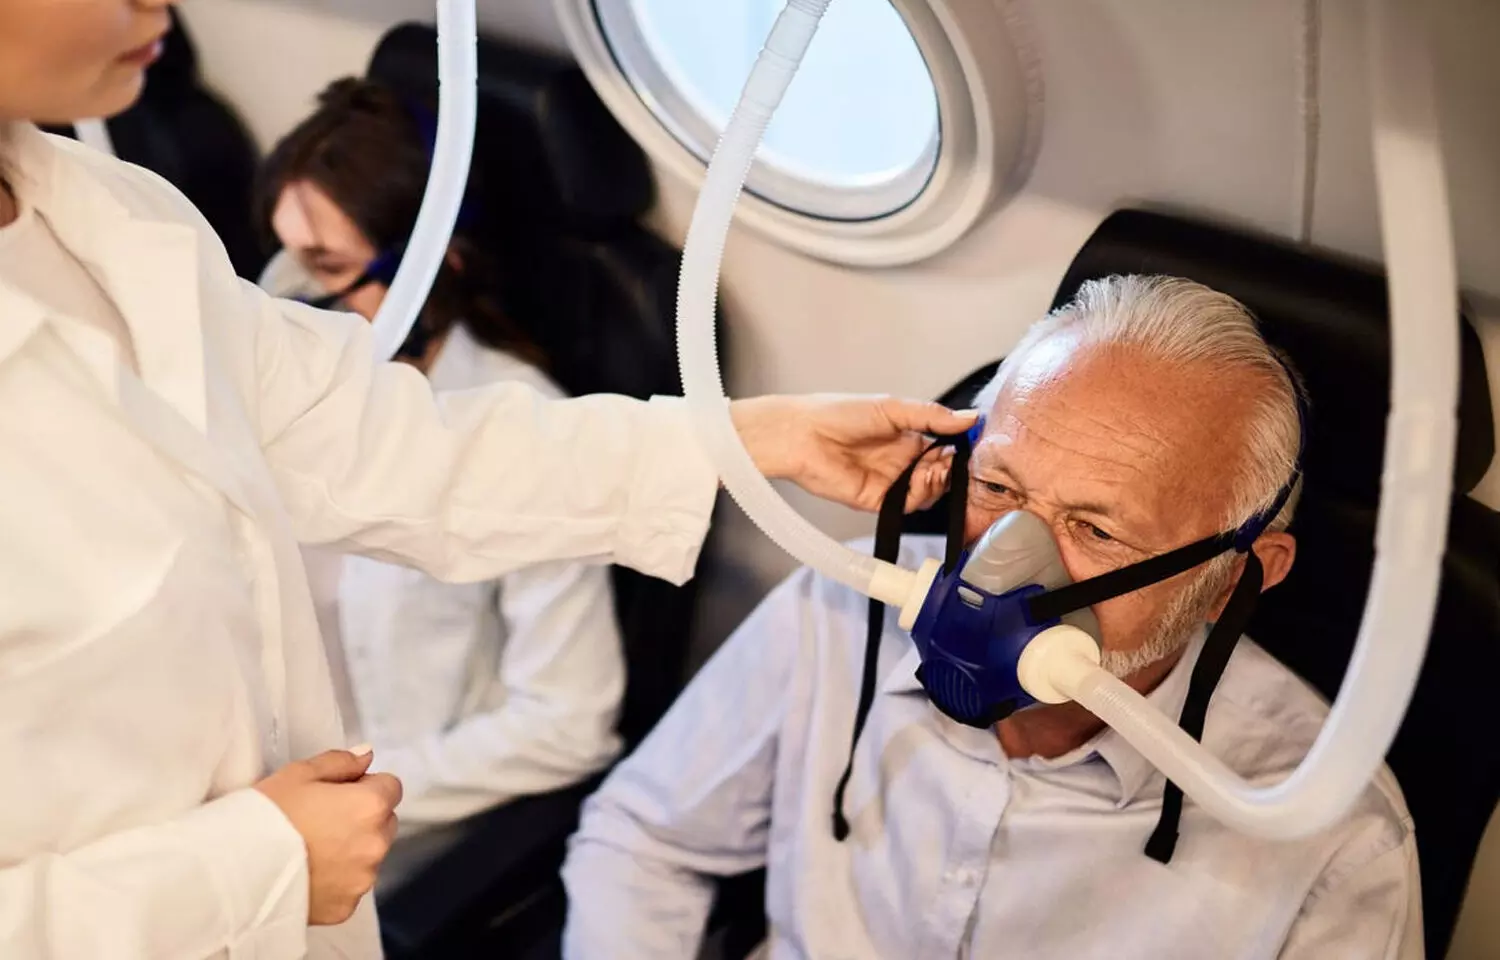 Hyperbaric oxygen treatments may reverse aging process, find study